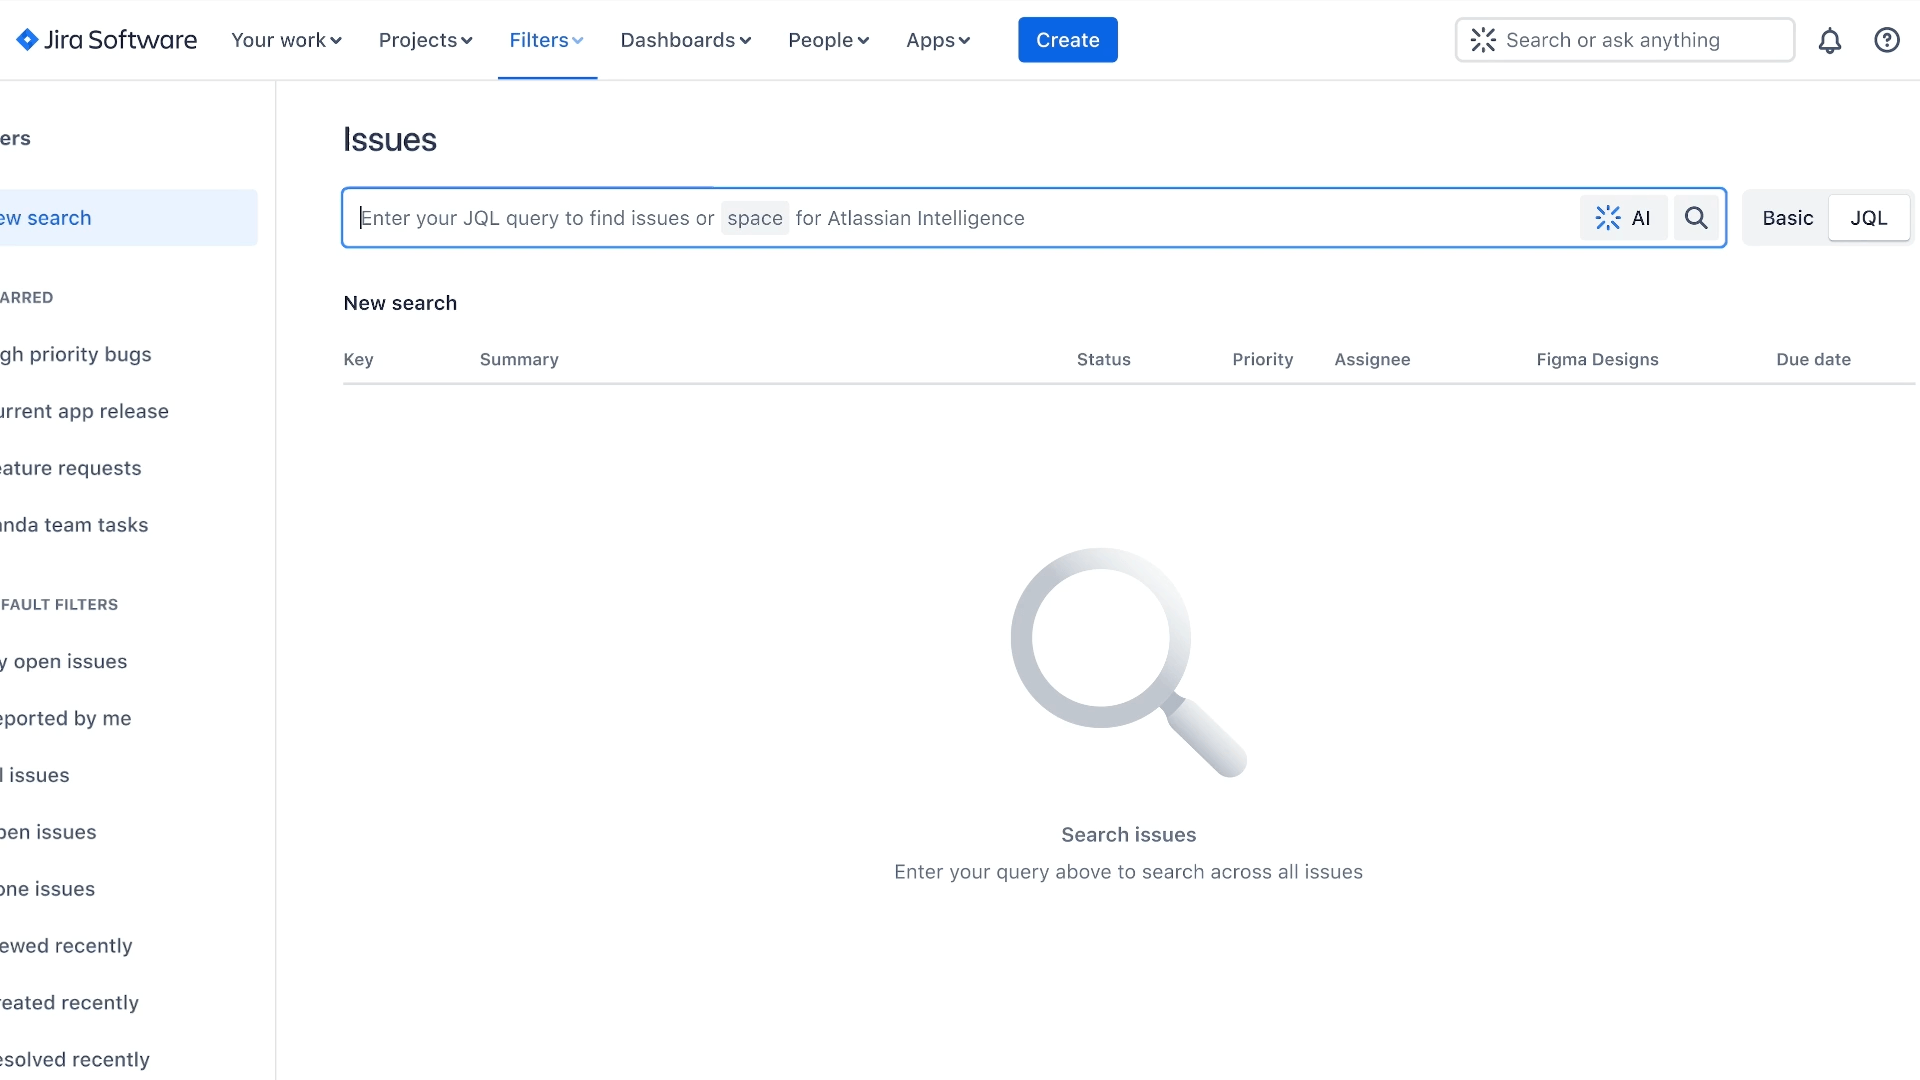 New in Jira, Confluence and Co.: A Team Member Named ‘Atlassian Intelligence’ - Filtering jira issues by using Atlassian Intelligence to write a sentence instead of using JQL